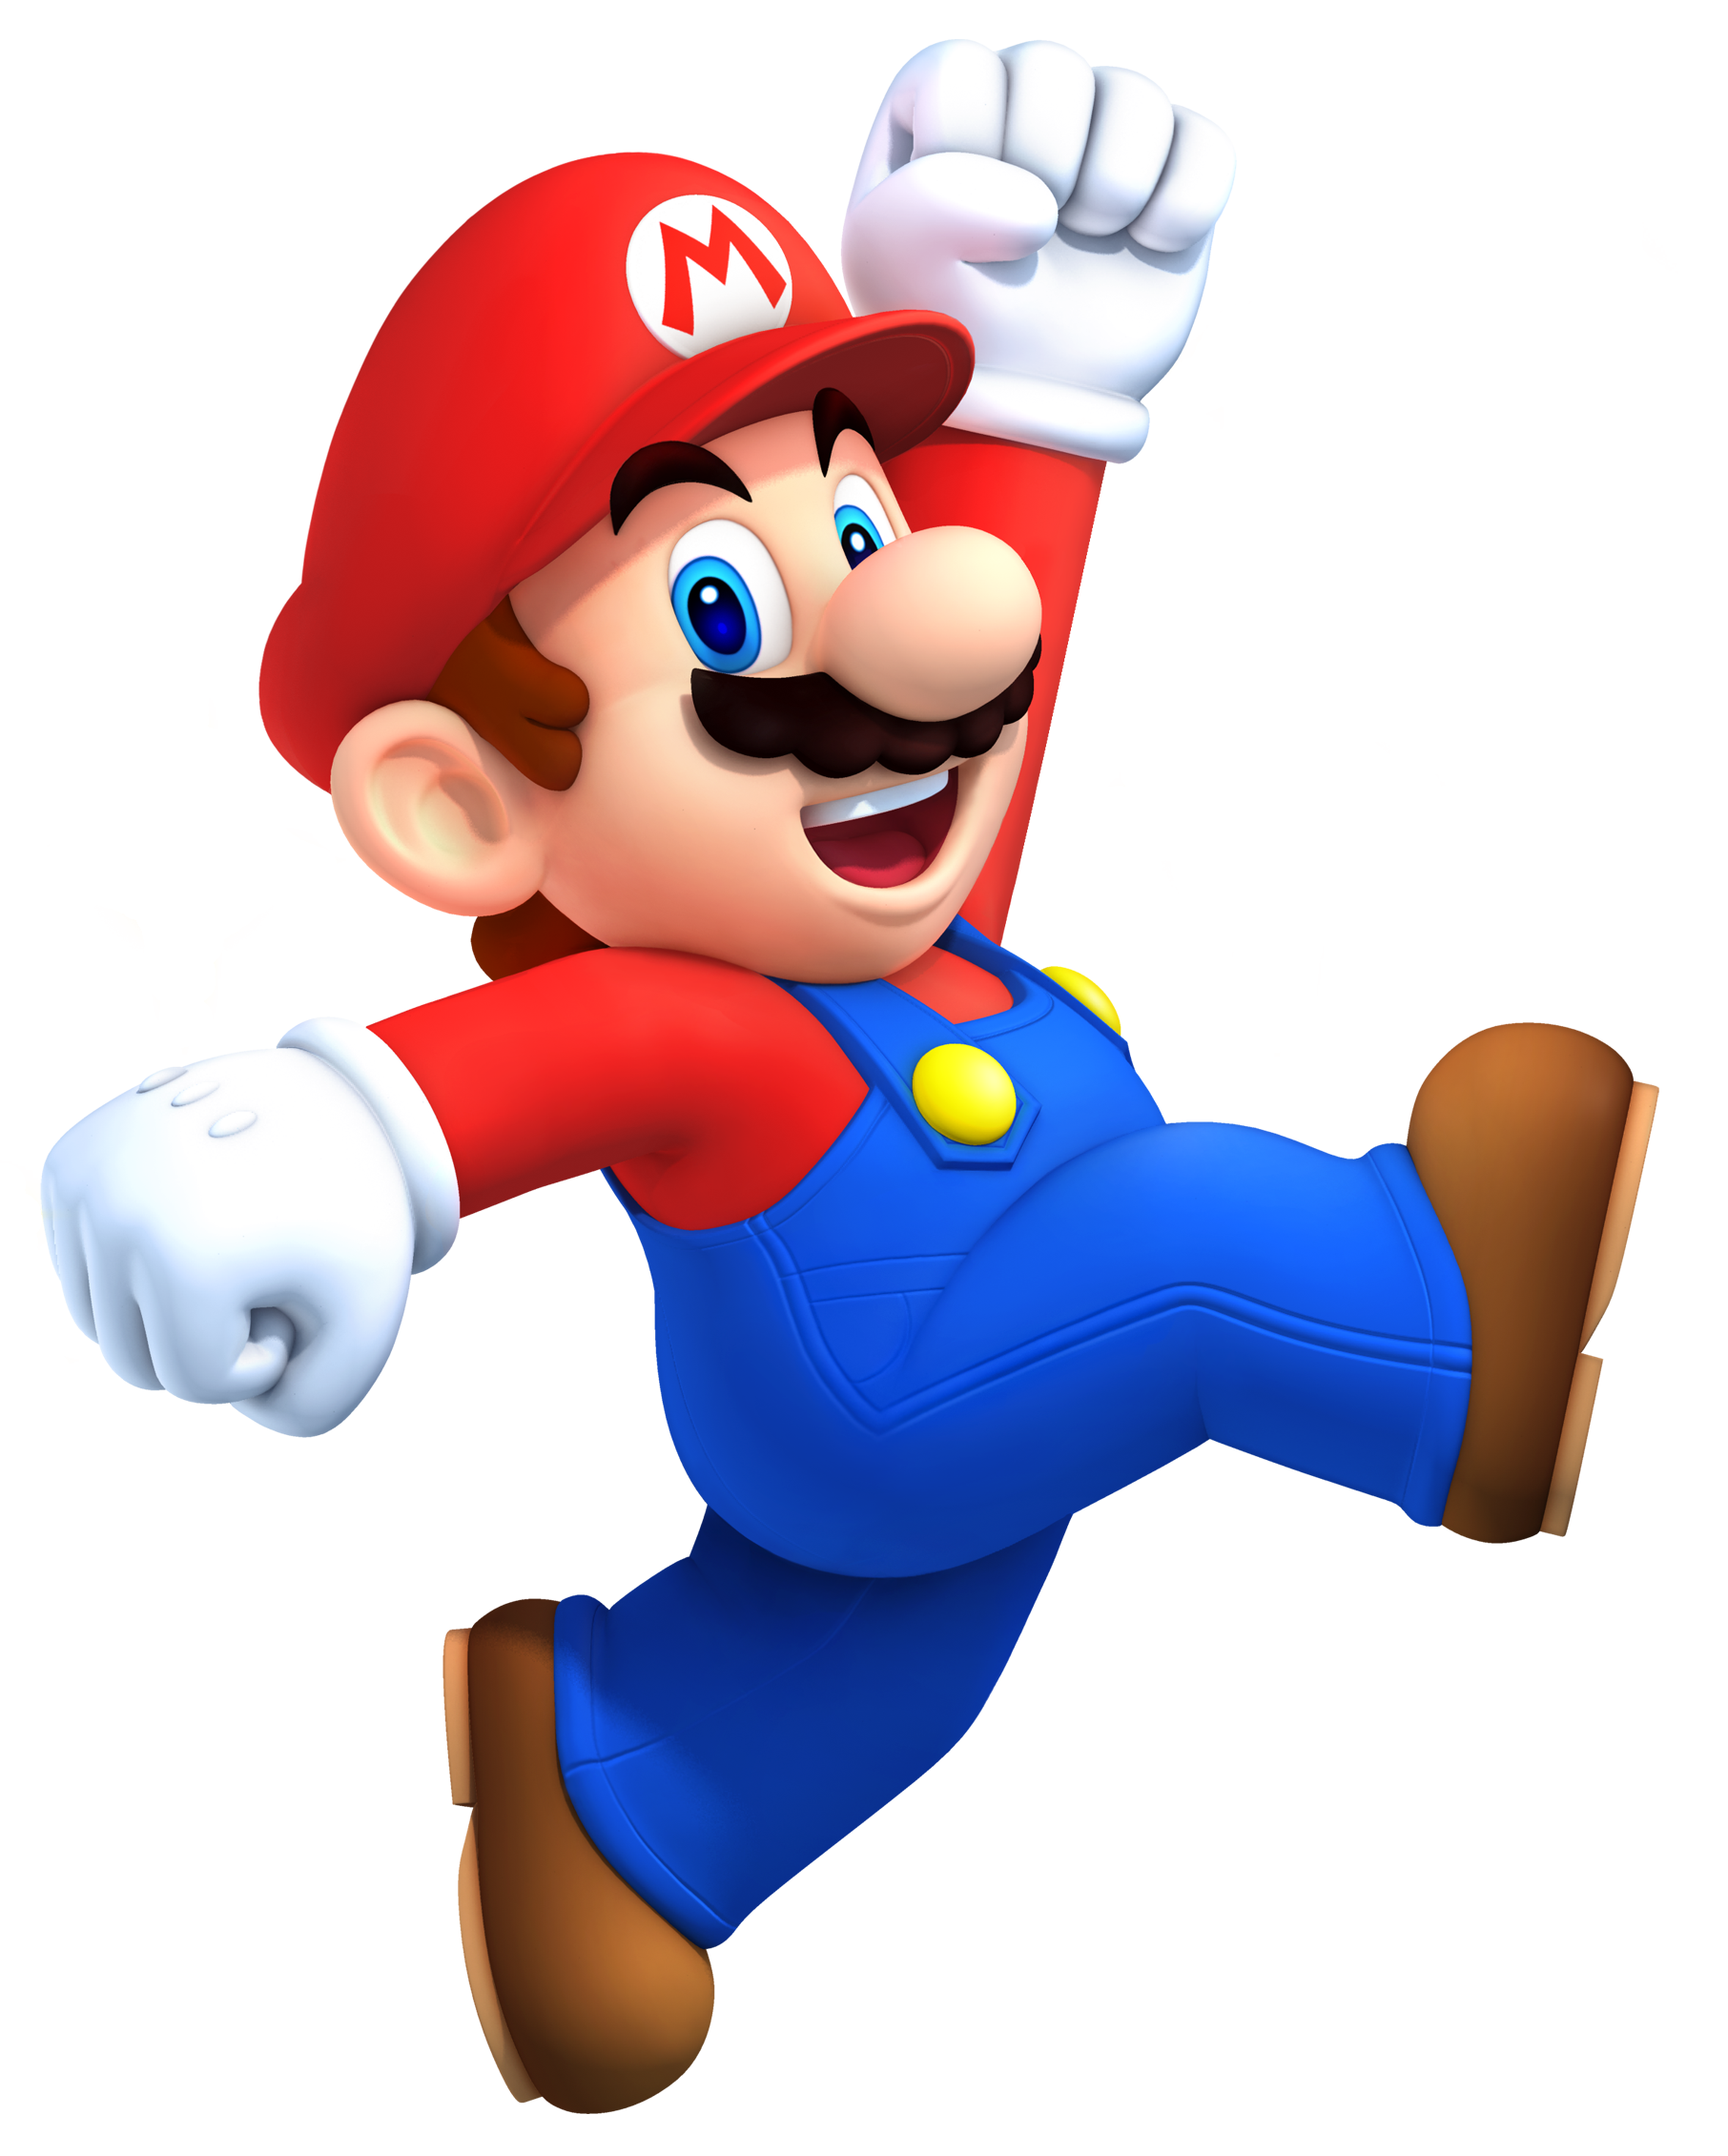 Mario - The Nintendo Wiki - Wii, Nintendo DS, and all things Nintendo